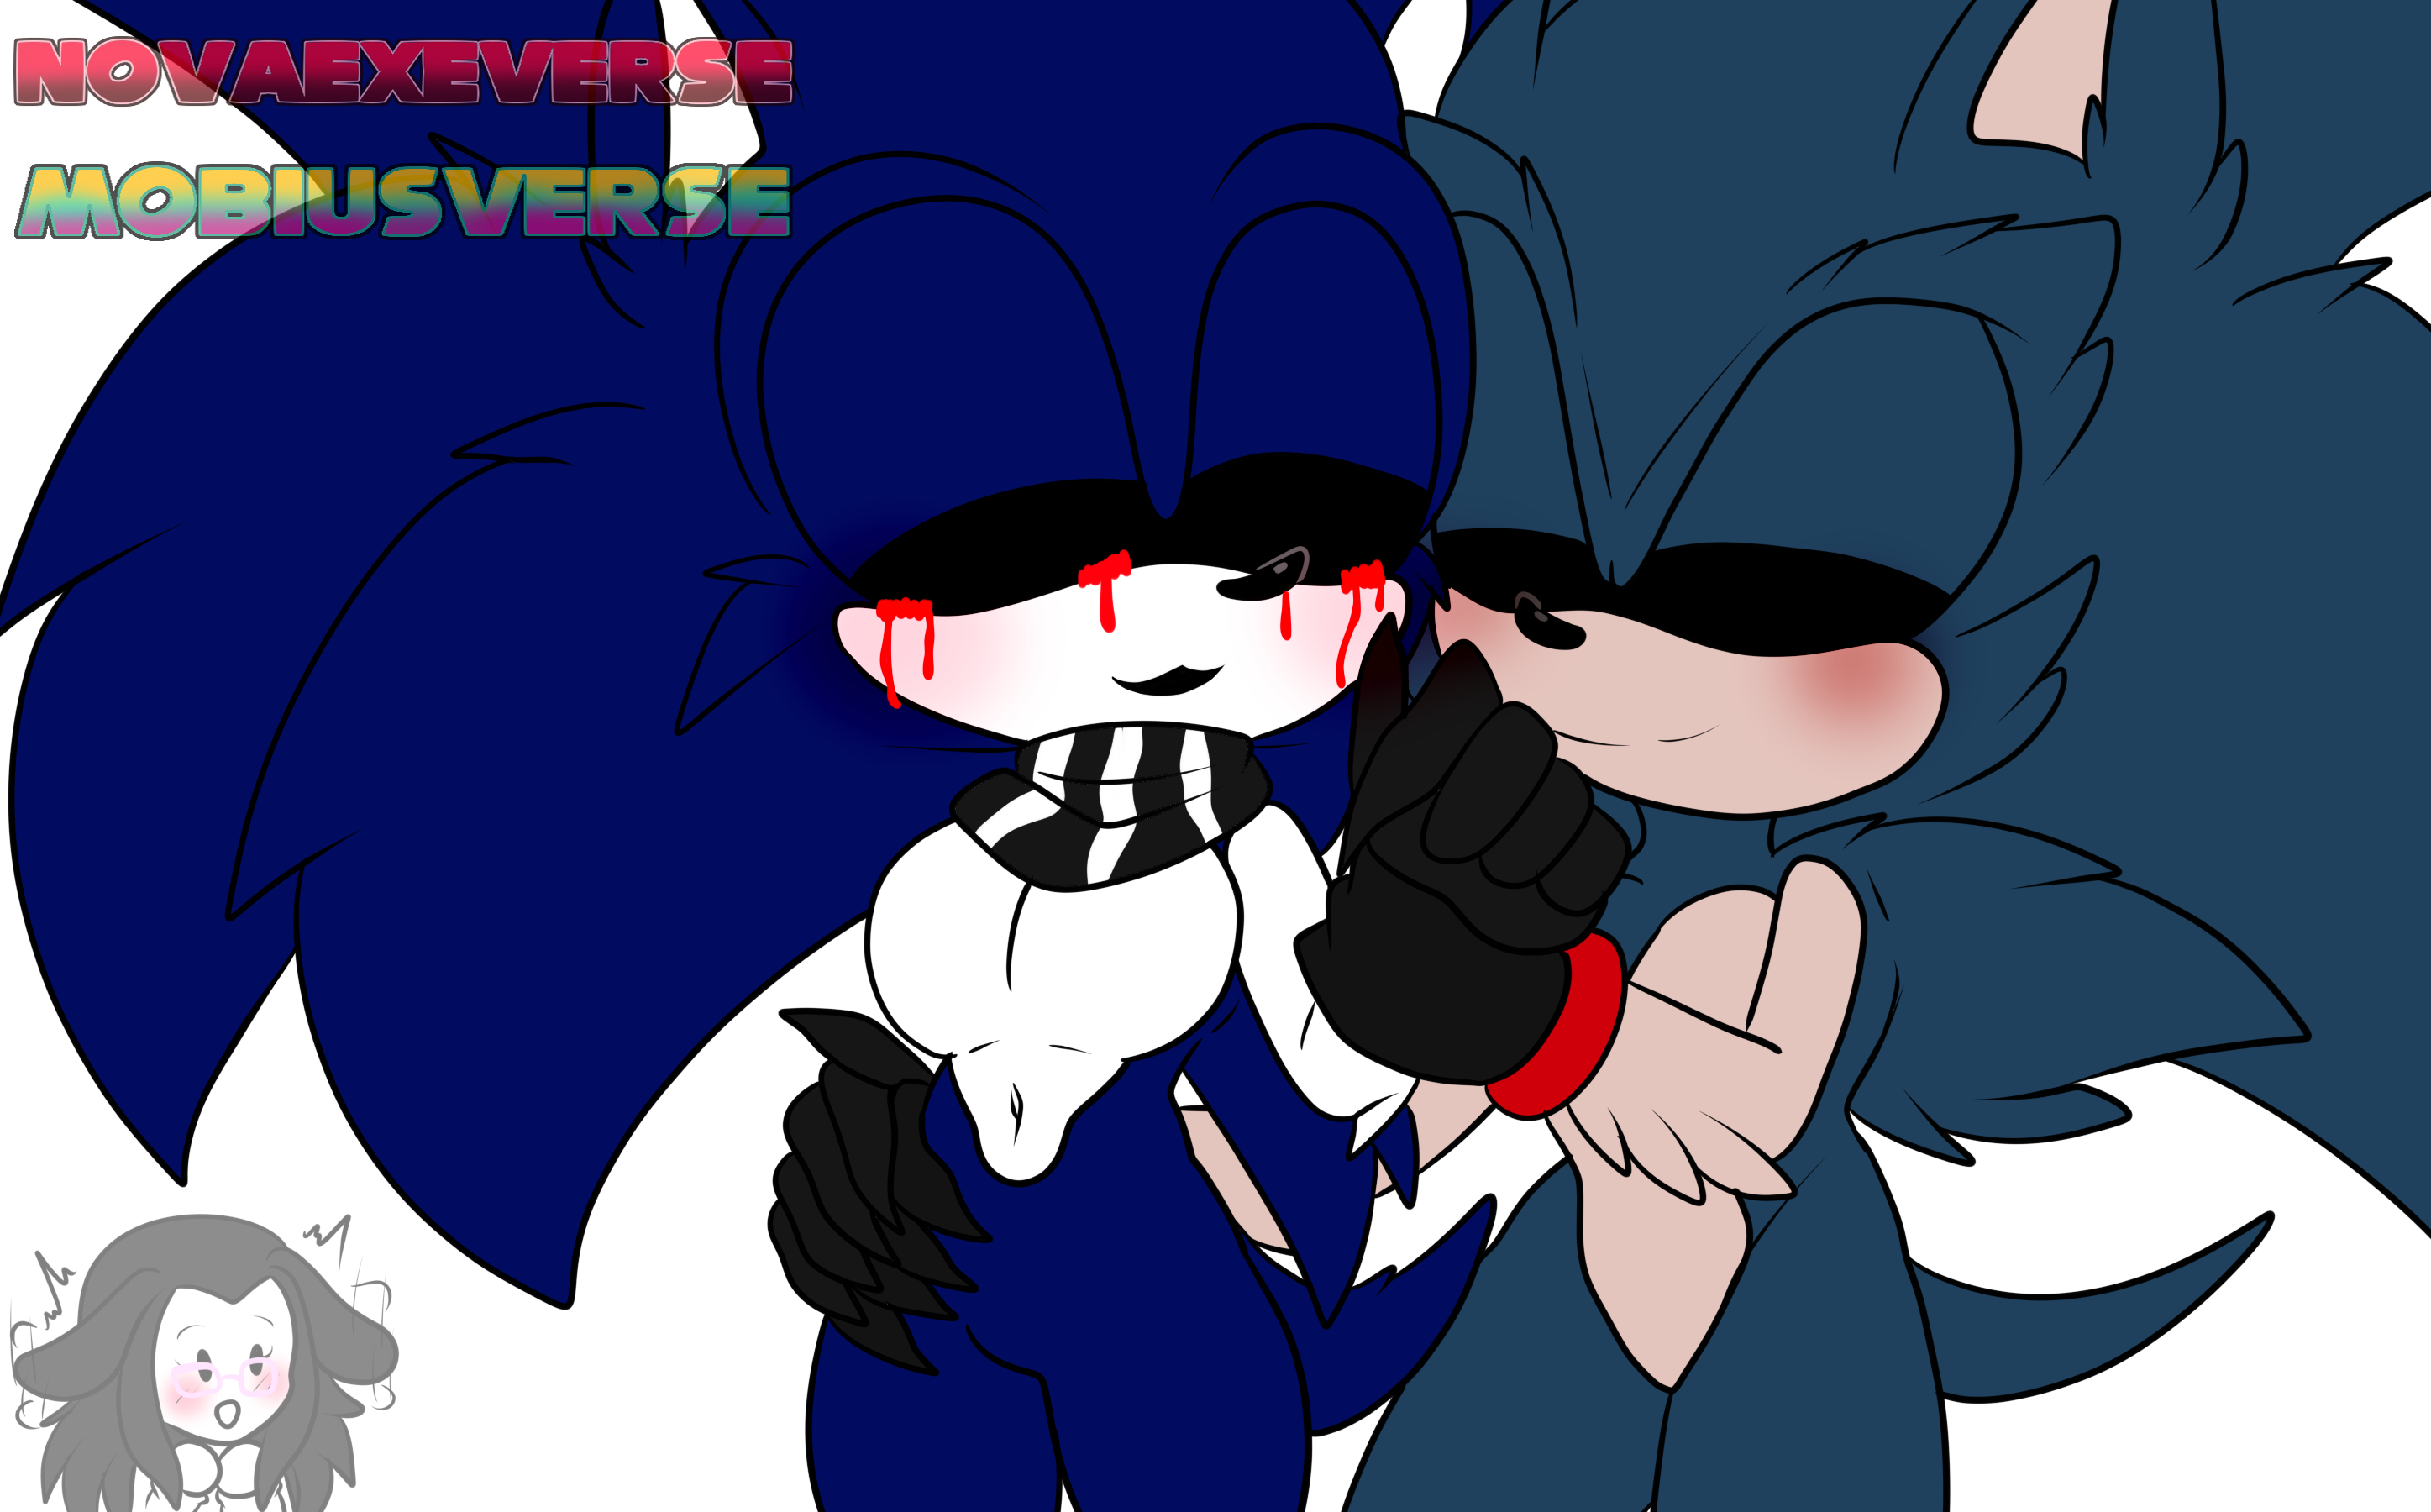 Starved Eggman negotiating with Sonic.exe by EXEExetior on DeviantArt